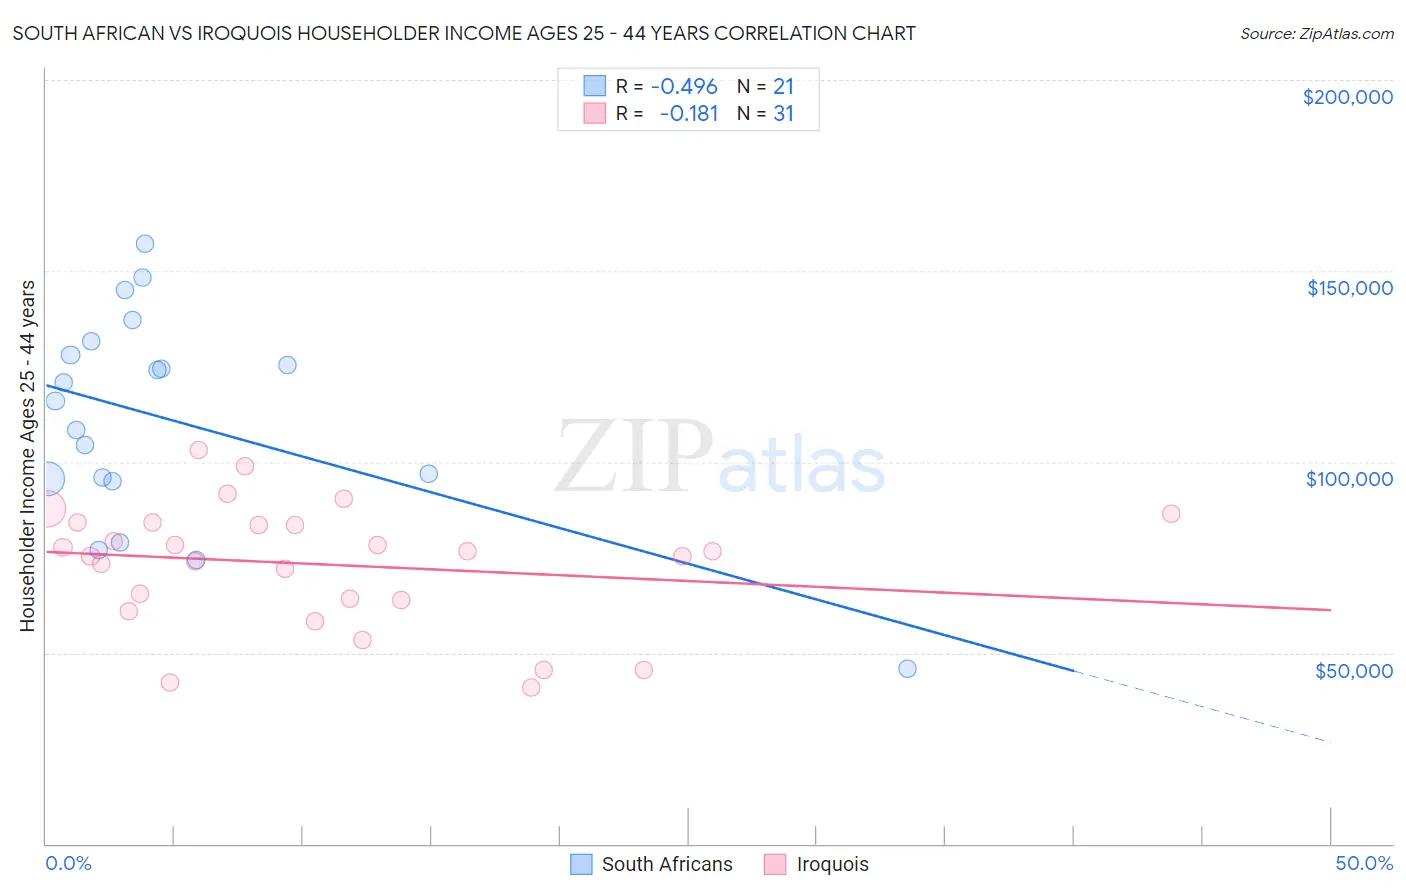 South African vs Iroquois Householder Income Ages 25 - 44 years